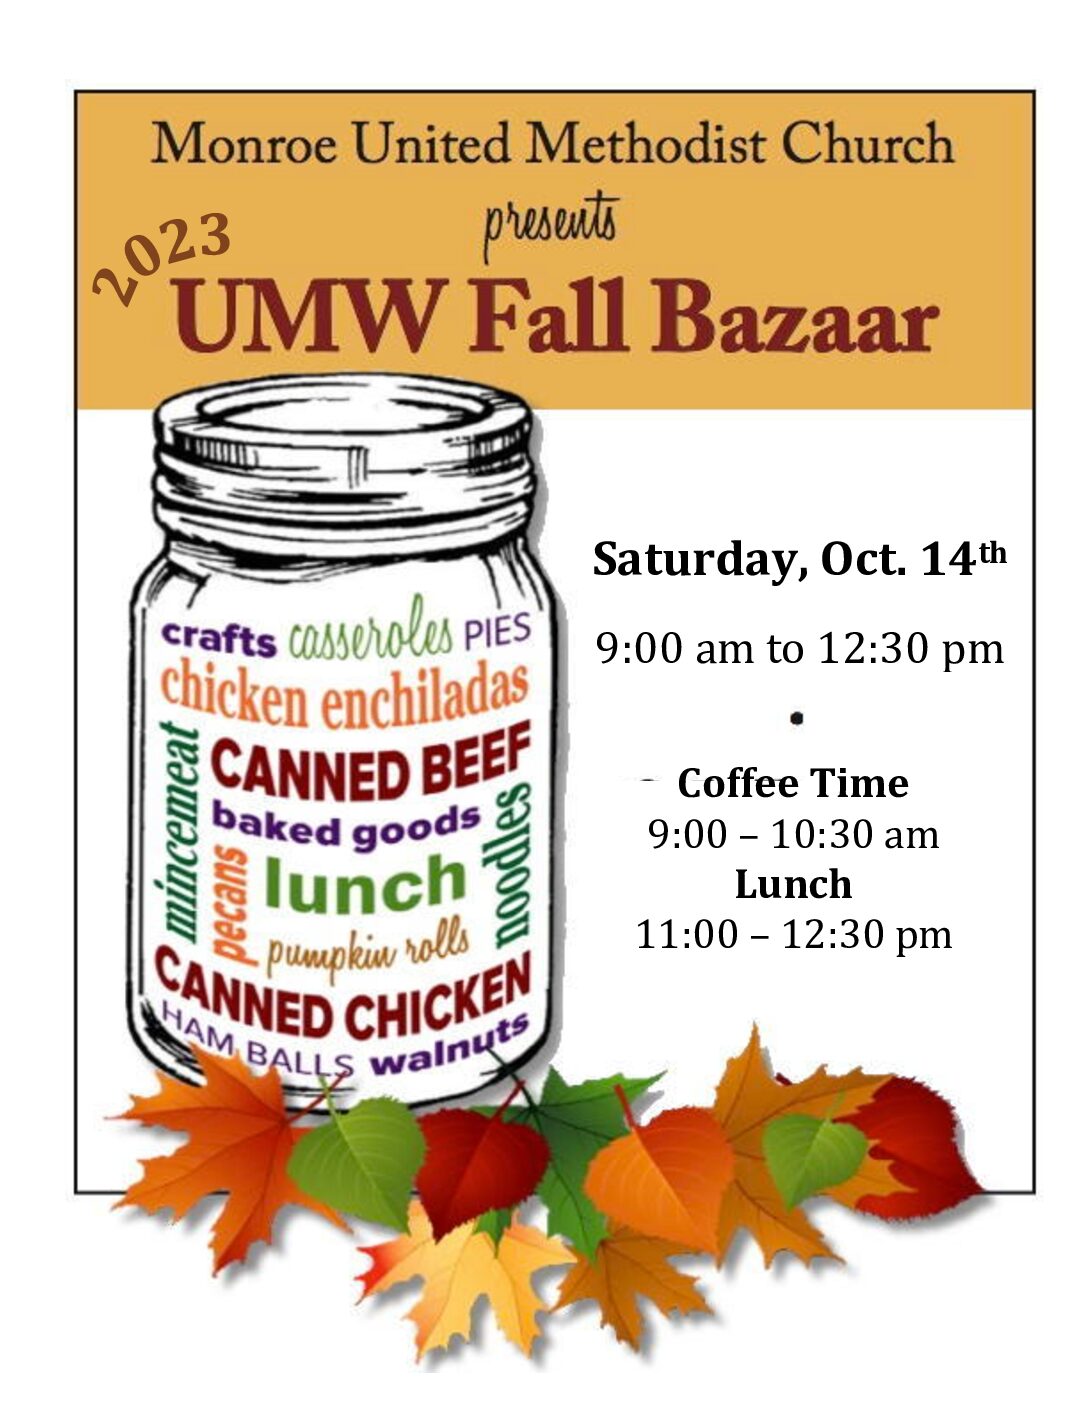 <h1 class="tribe-events-single-event-title">UMW Fall Bazaar 10/14 In Monroe</h1>